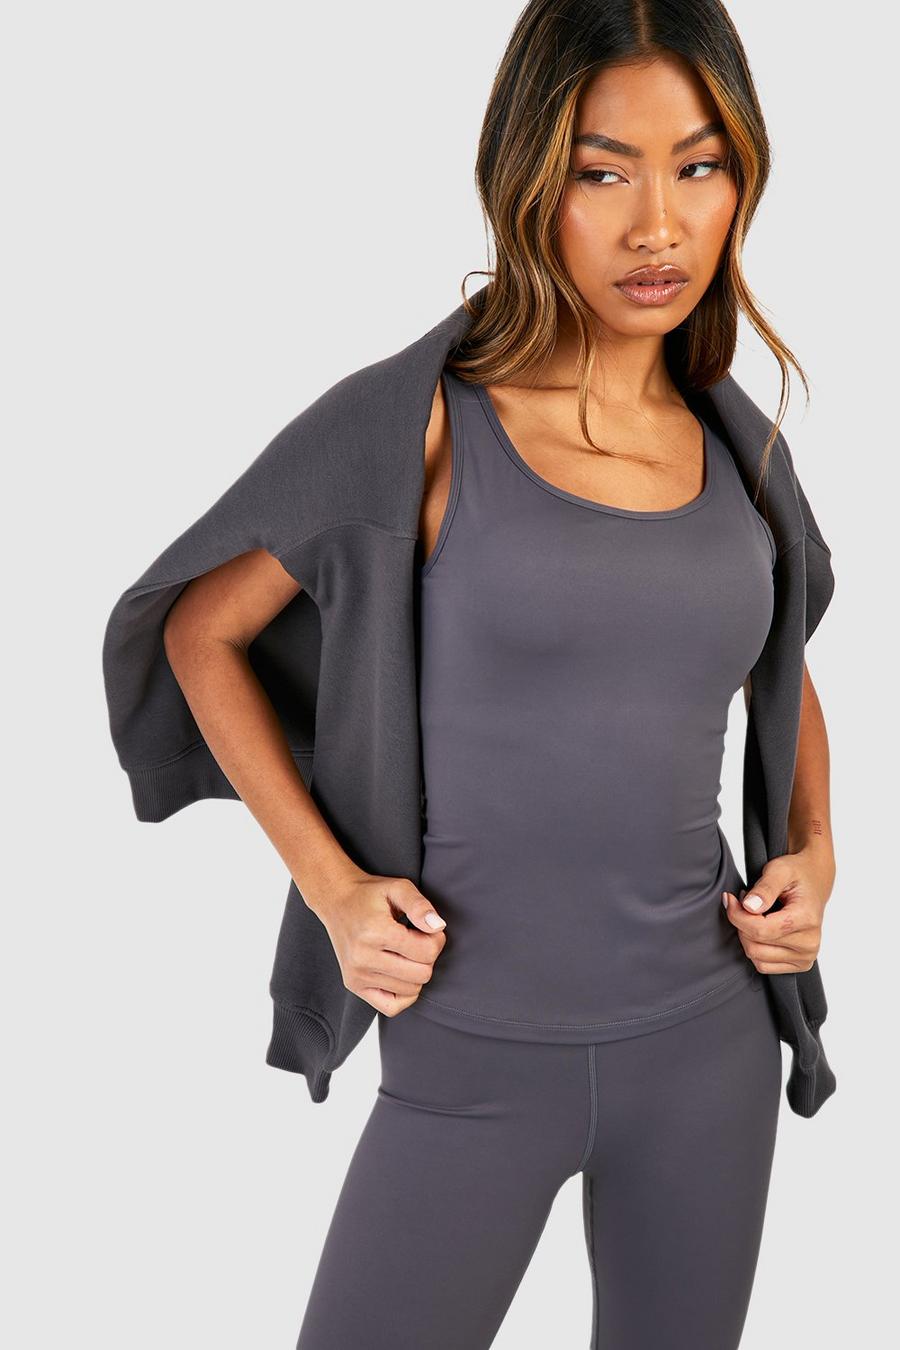 Charcoal grey Dsgn Studio Supersoft Peached Sculpt Padded Tank Top Top